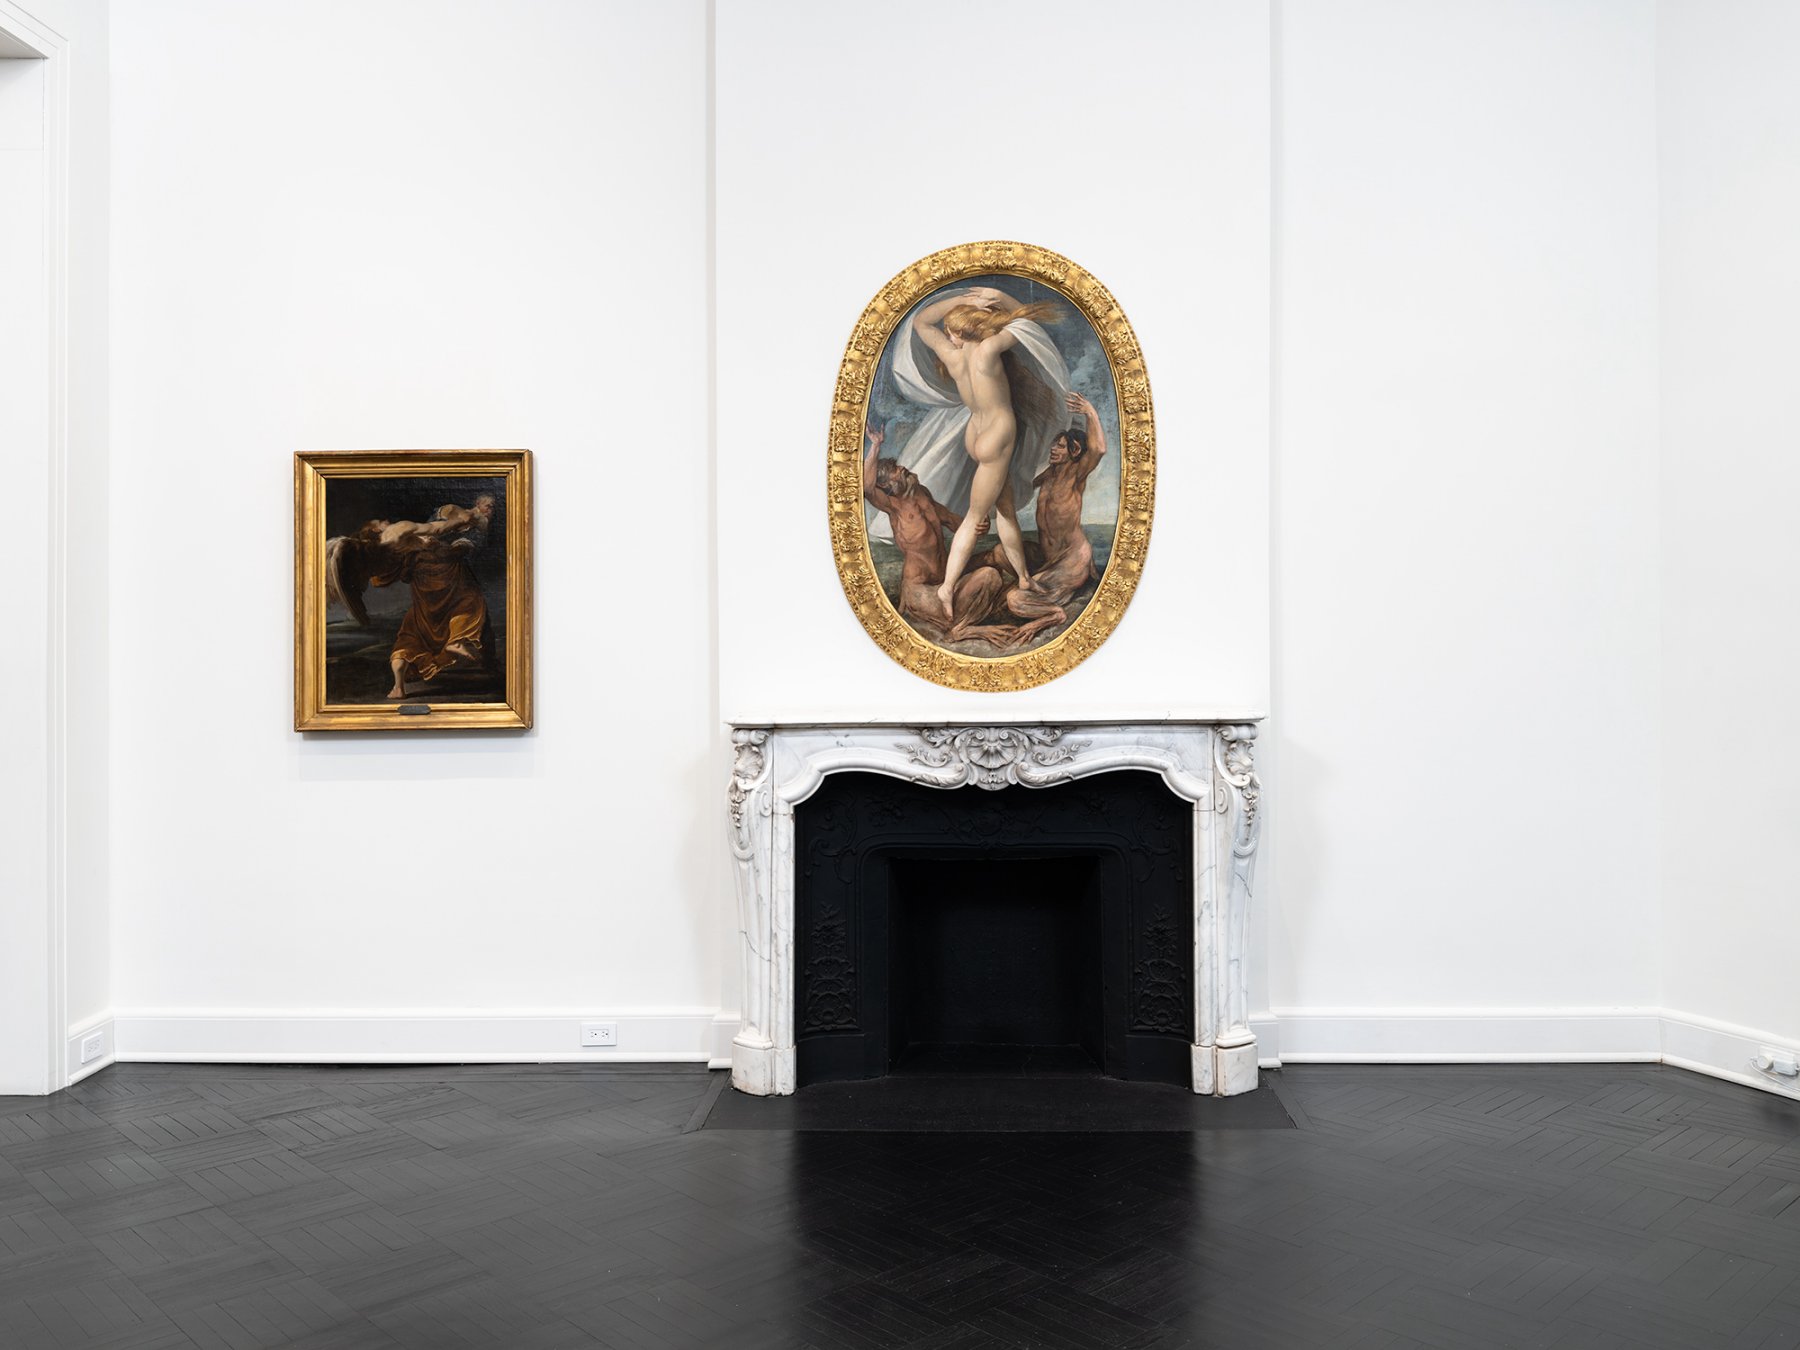 Installation image for Time Travel: Italian Masters through a Contemporary Lens, at Petzel